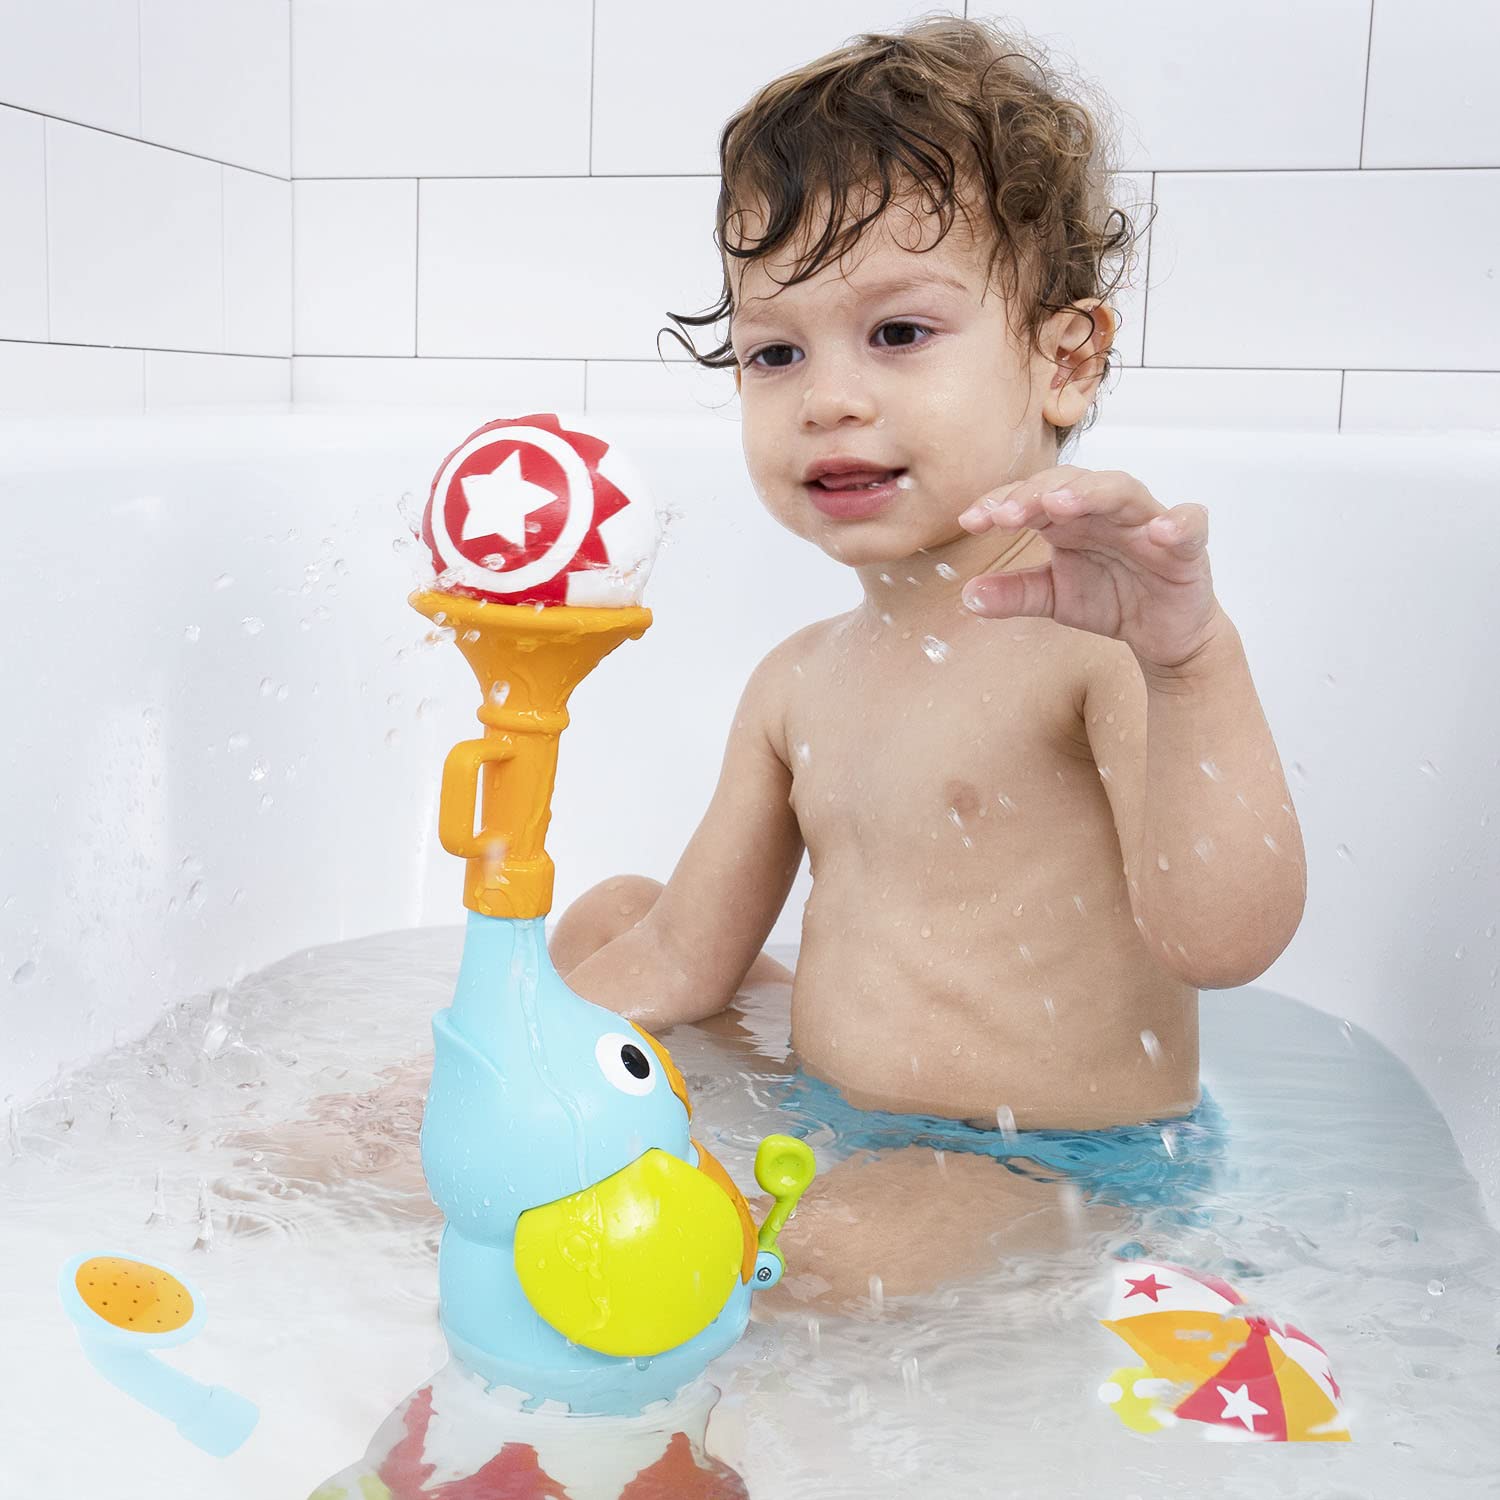 Yookidoo Baby Bath Toys for Toddlers Ages 1-3, EleFountain Sprinkler Water Show - Elephant Sprayer Set Features 3 Spouts with Different Spray Patterns - STEM Based Toy for Bath Time - for Boys & Girls